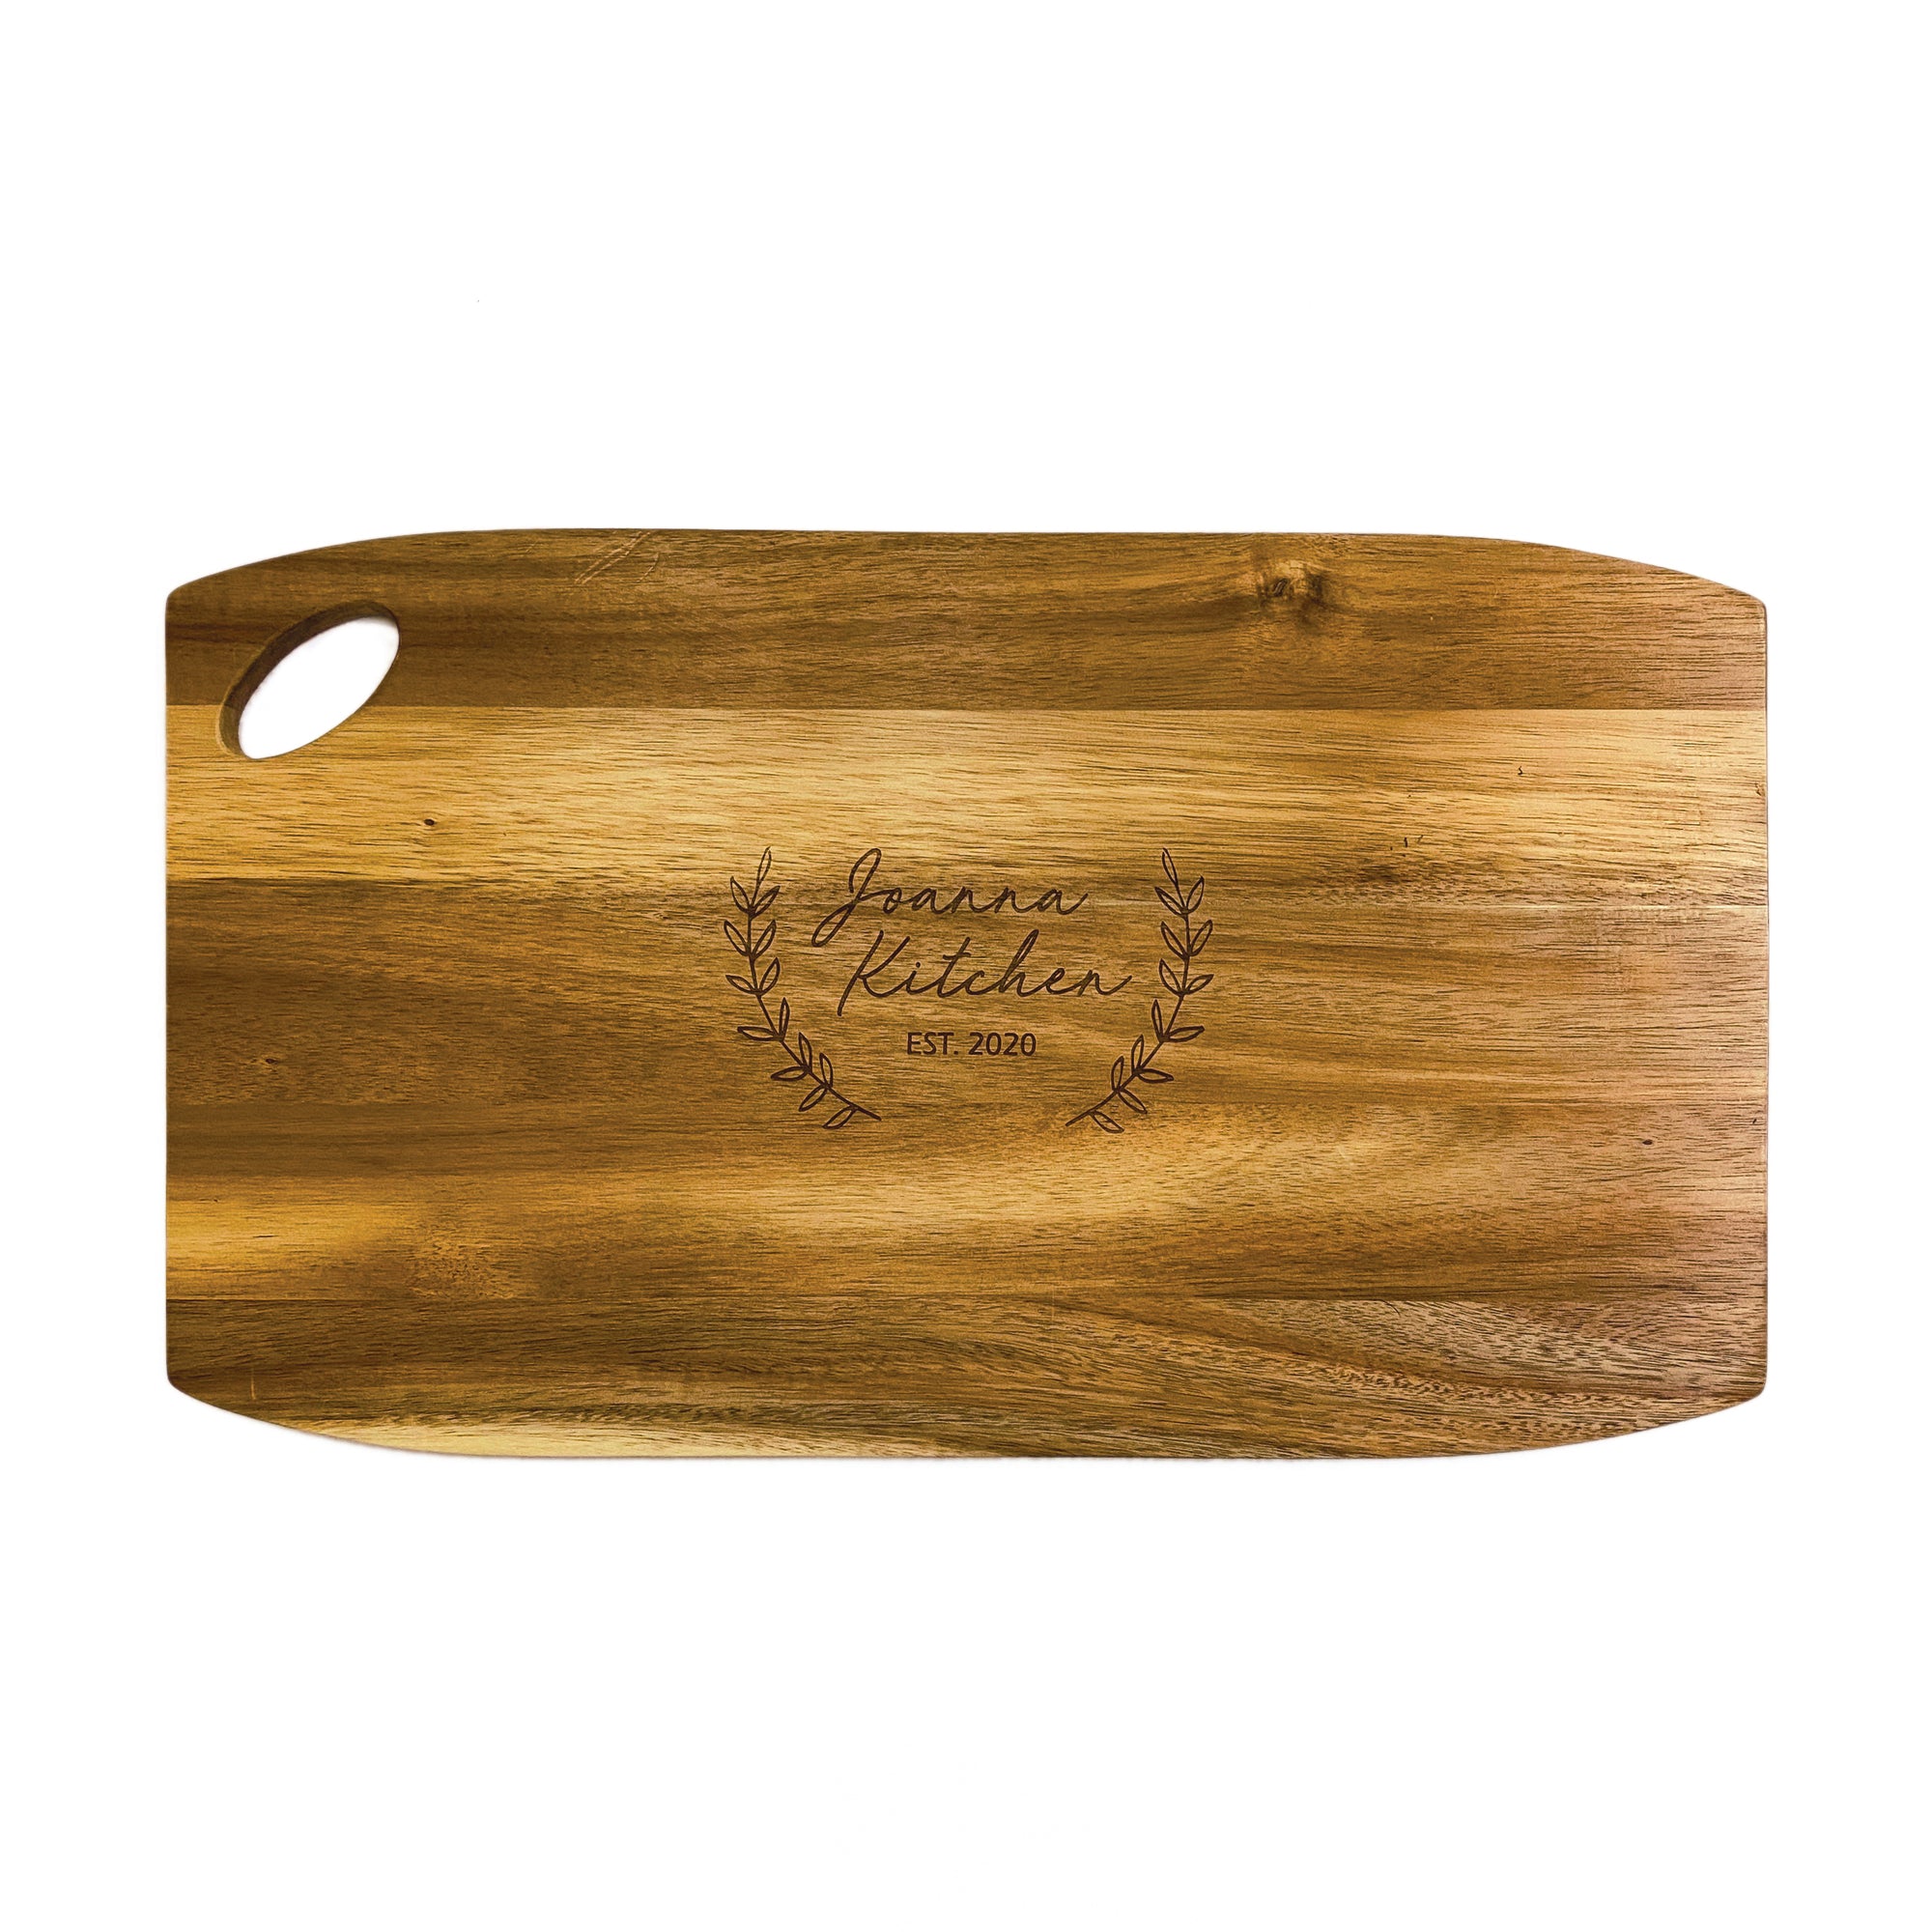 Wooden Rounded Rectangle Cutting & Serving Board